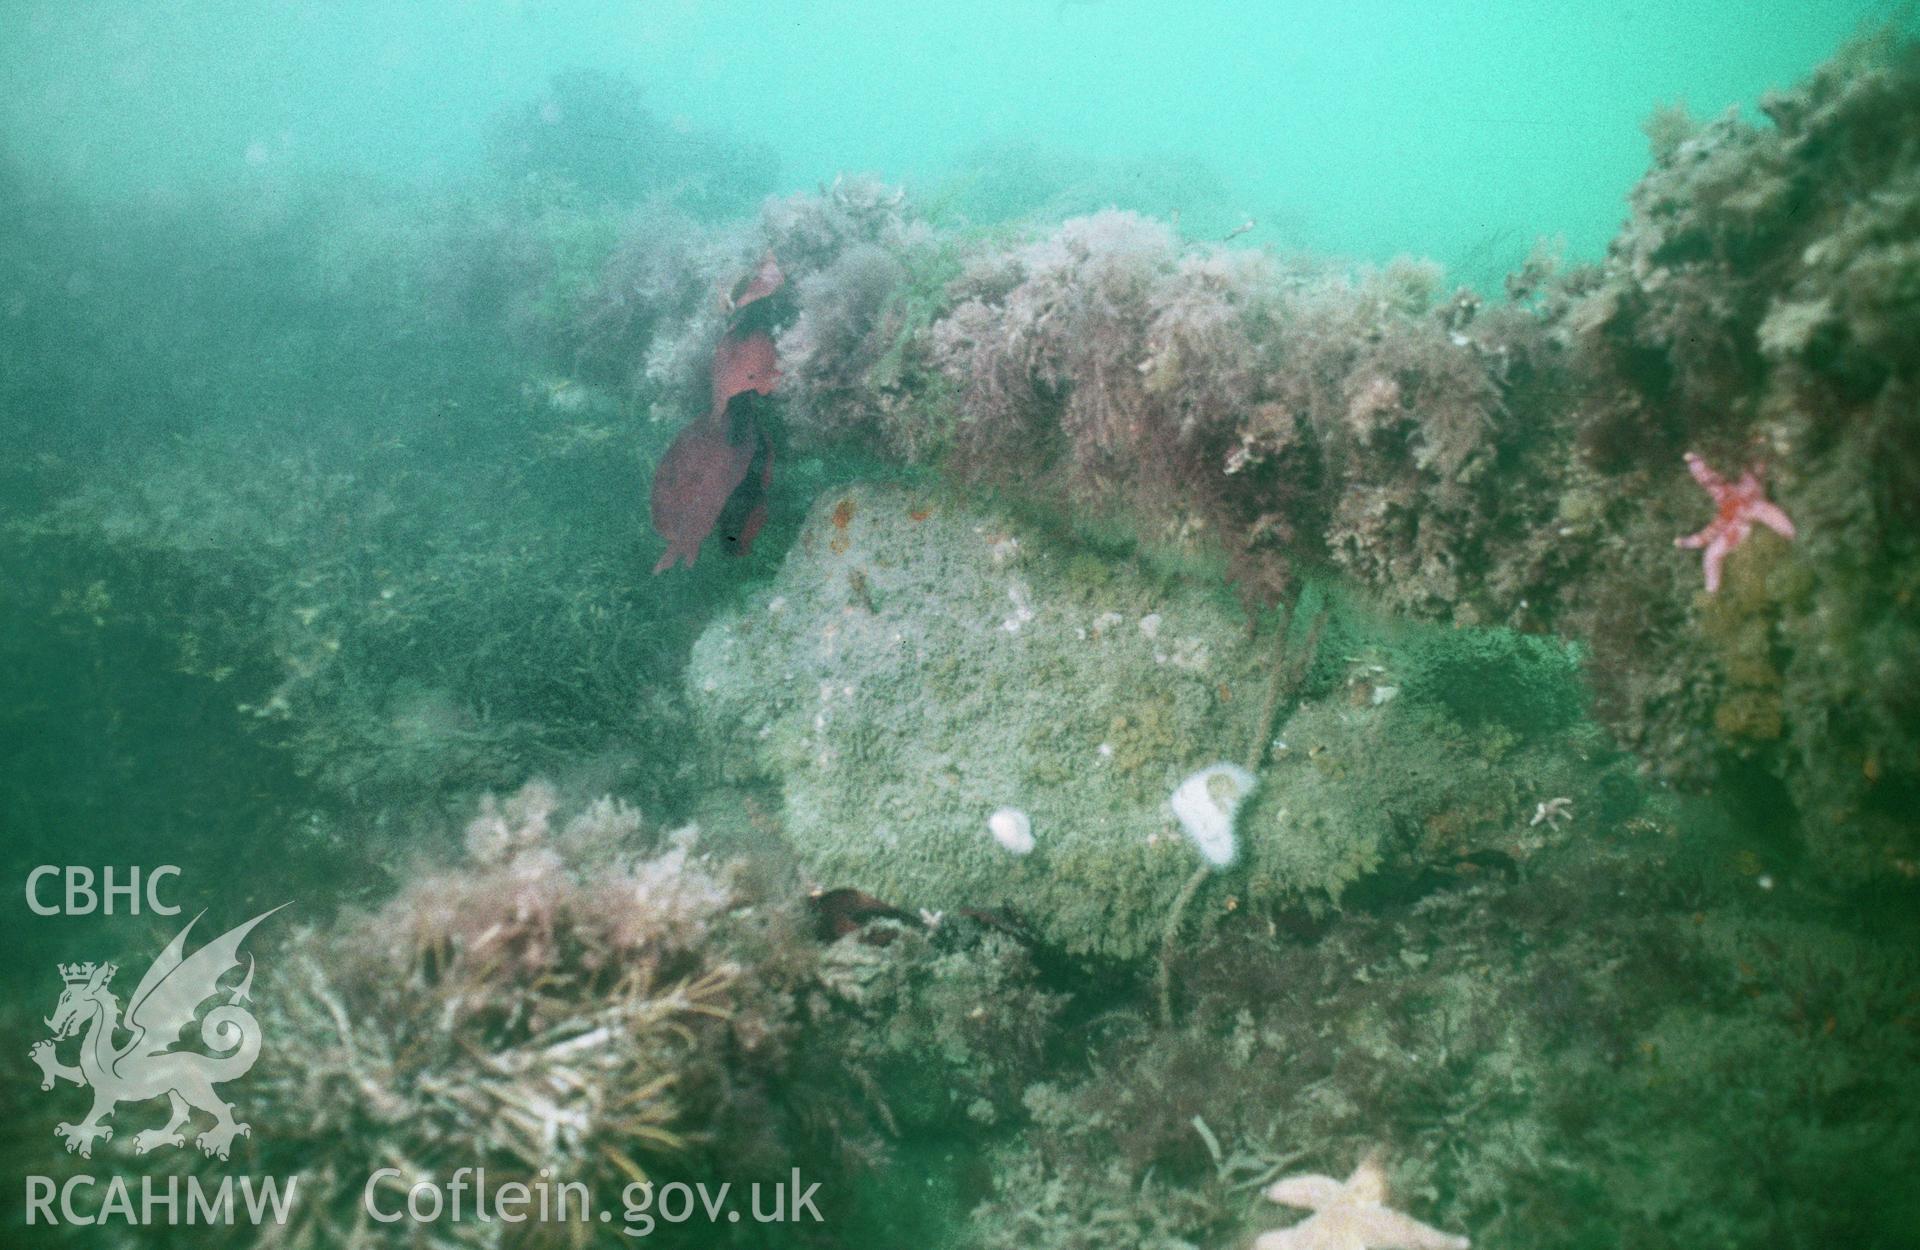 View of anchor stock and ring, one of a set of 41 colour slides from an underwater survey of the Tal-y-Bont designated shipwreck, carried out by the Archaeological Diving Unit.